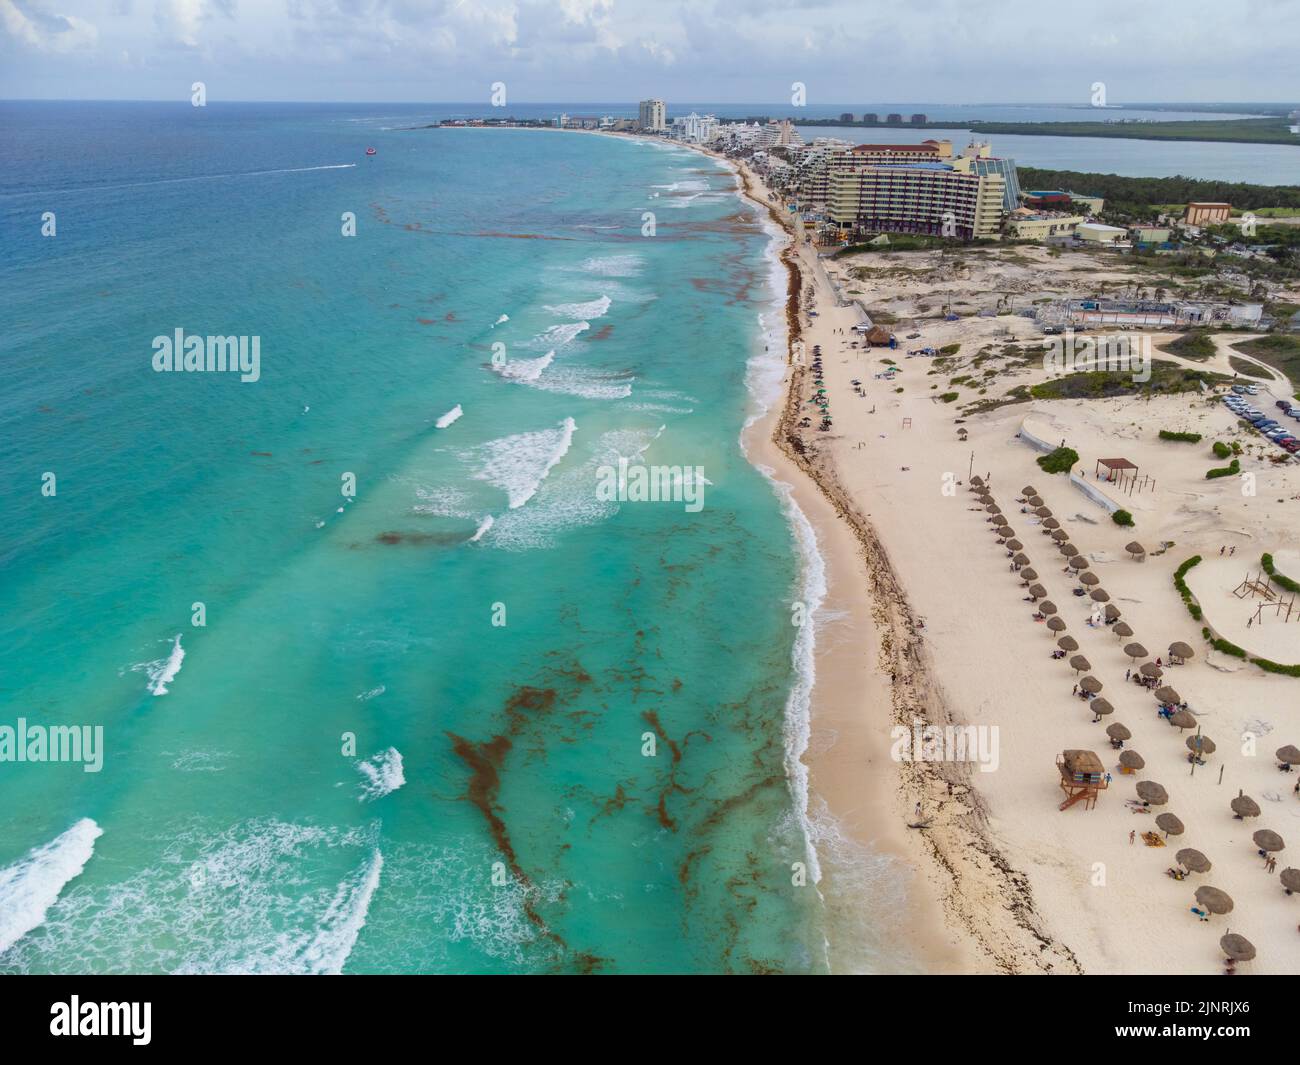 Top view of the resort town on the sandy beach. The sea near the shore is polluted with seaweed. Ecosystem threat, social and environmental issues, cl Stock Photo